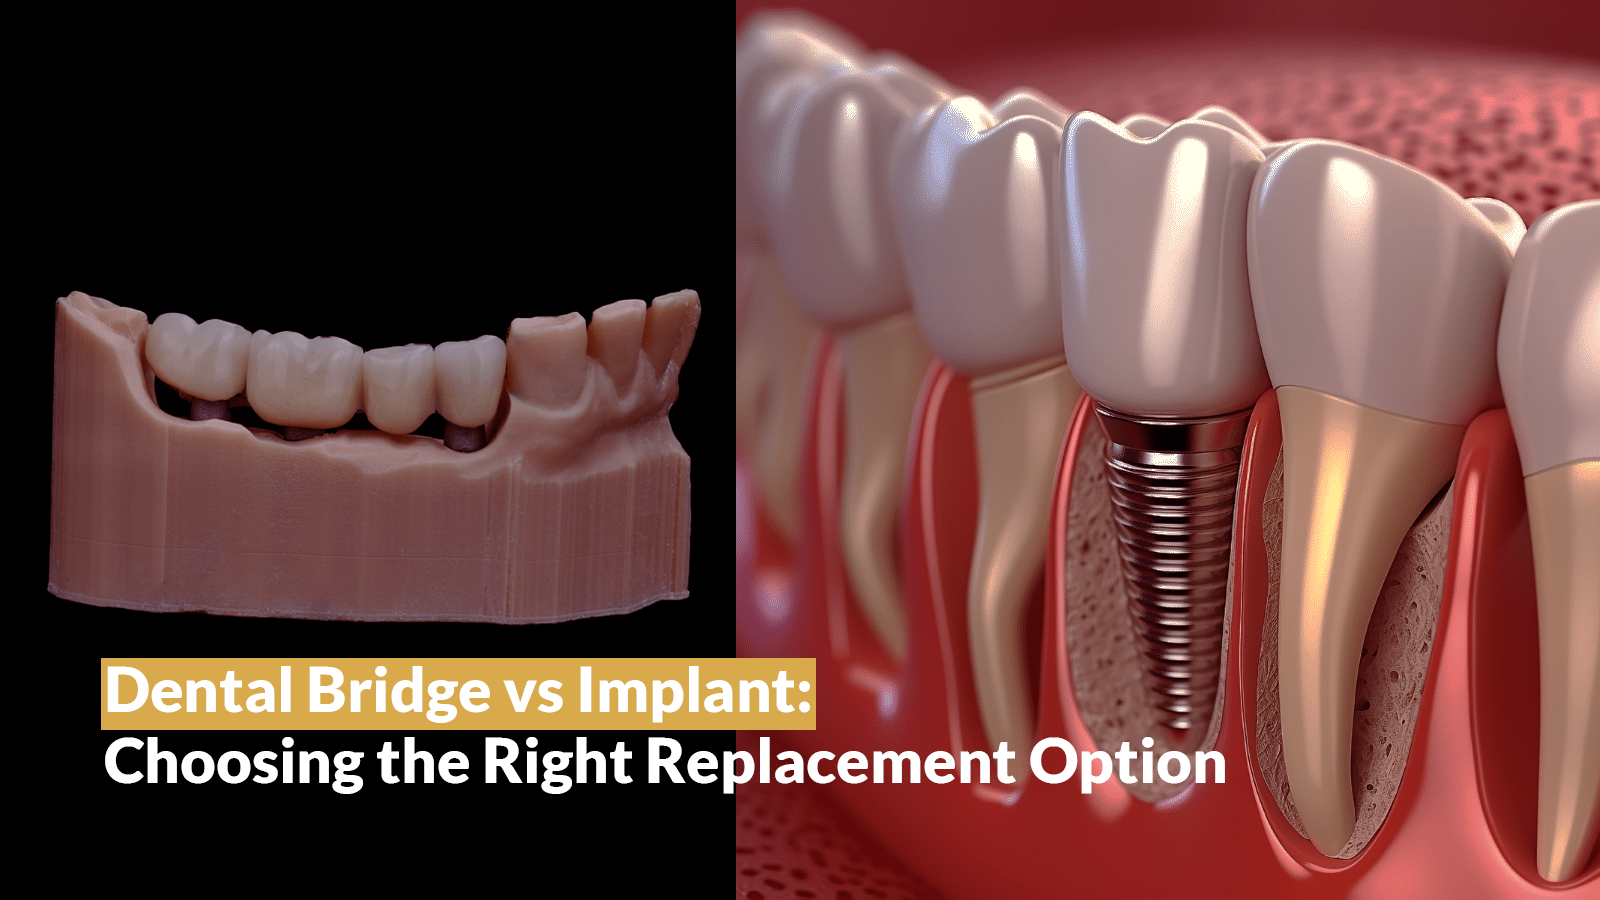 Dental Bridge vs Implants: Which is Right for You?